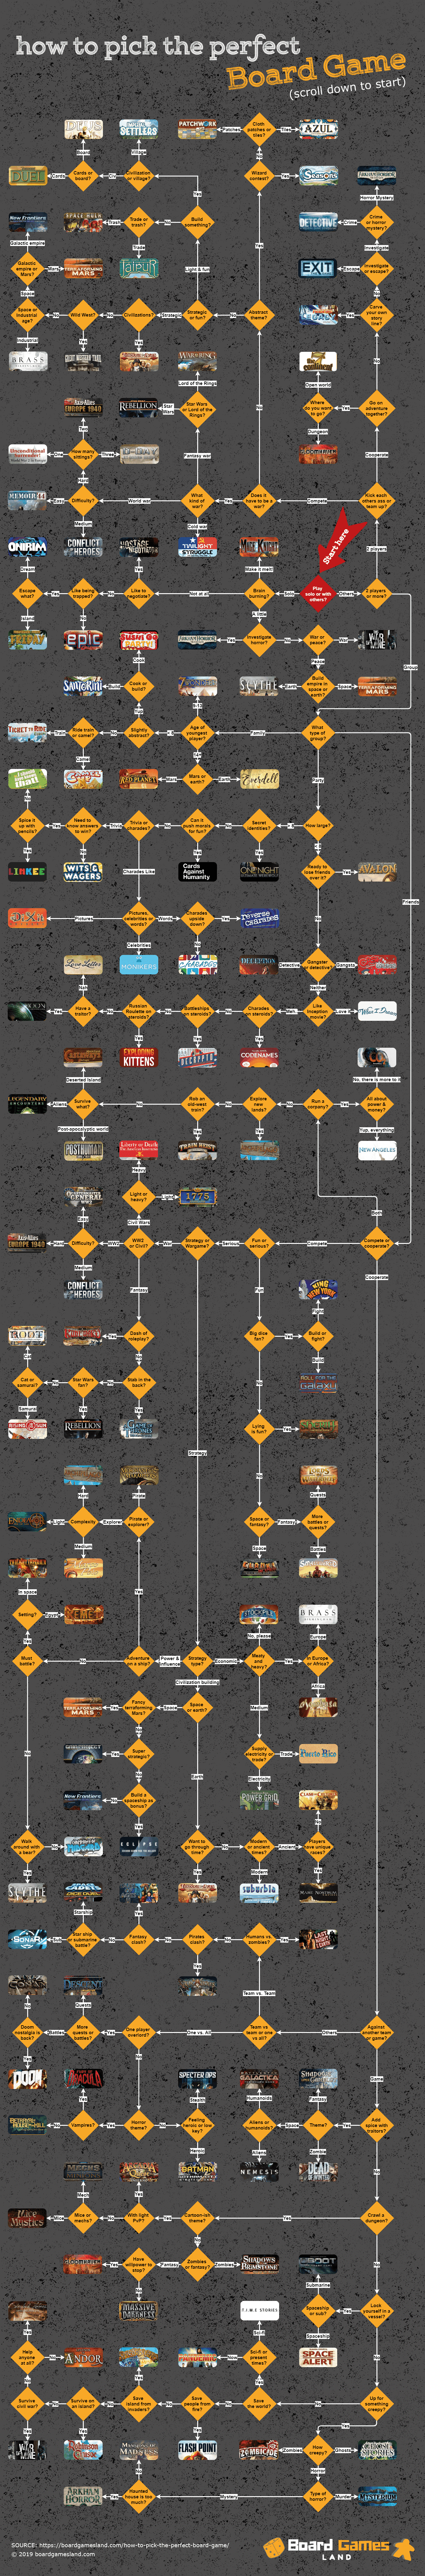 Best Board Game selector or picker of 2019. How to choose a perfect board game to play - this chart will help you pick the right board game for you!